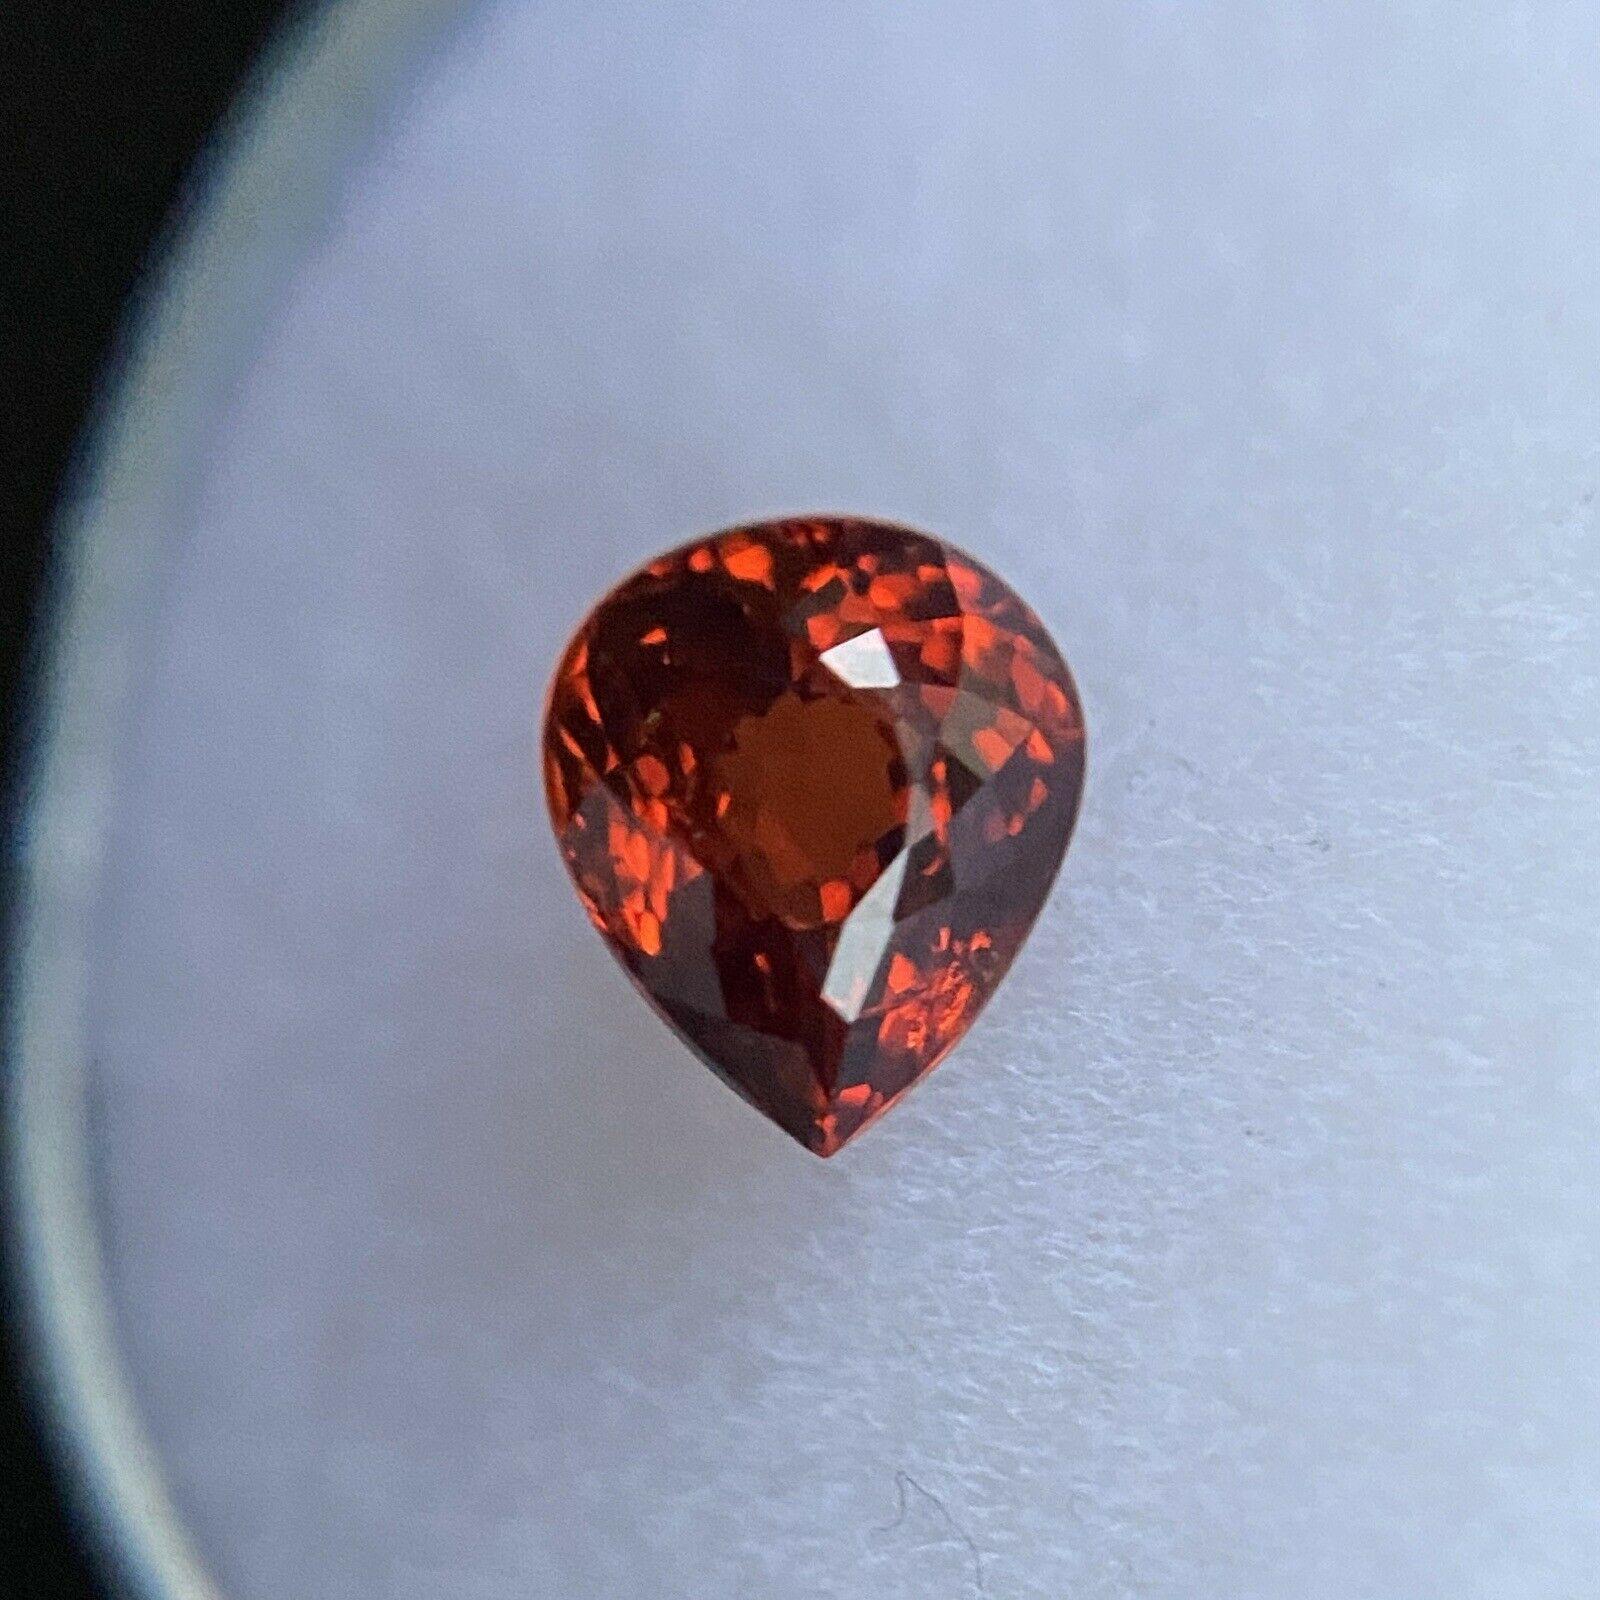 Fine 1.37ct Vivid Orange Red Spessartine Garnet Pear Cut Loose Gem 6.8 x 5.8mm

Fine Natural Spessartine Garnet Loose Gem. 
1.37 Carat stone with a beautiful reddish orange colour and very good clarity. A clean stone with only some small natural